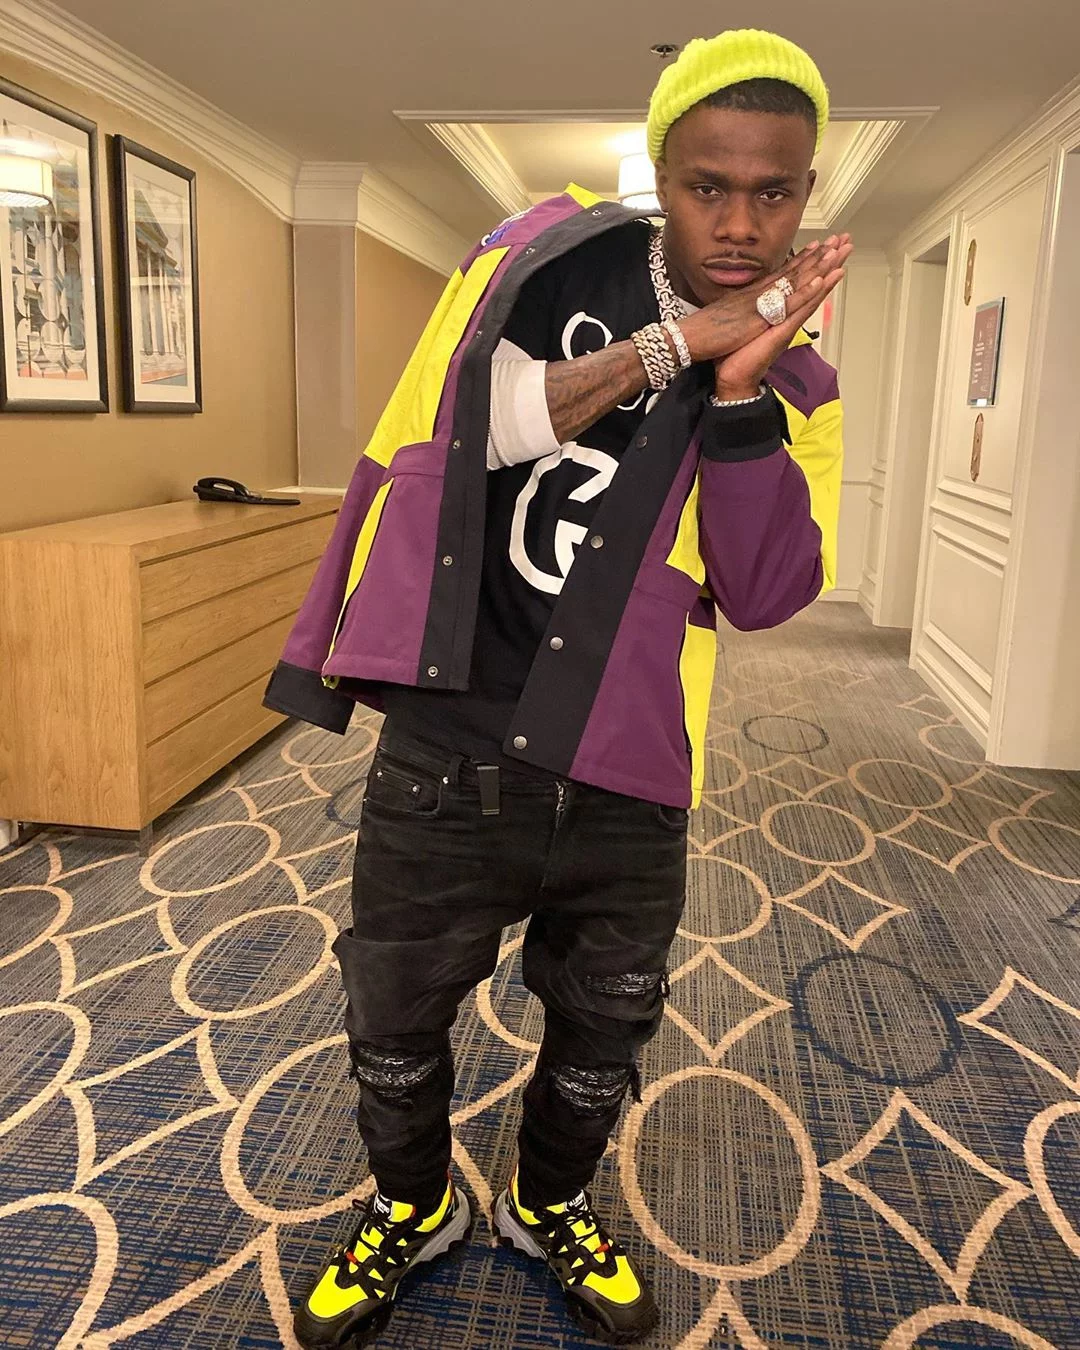 WHAT'S ON THE STAR? Brands on Instagram: DaBaby in @shophollywoodhunna  pants ✨ 📲Find more outfits in @whatsonthestar.app #dababy #lilbaby #hiphop  #rap #explorepage #nbayoungboy #drake #liluzivert #music #explore #lildurk  #megantheestall